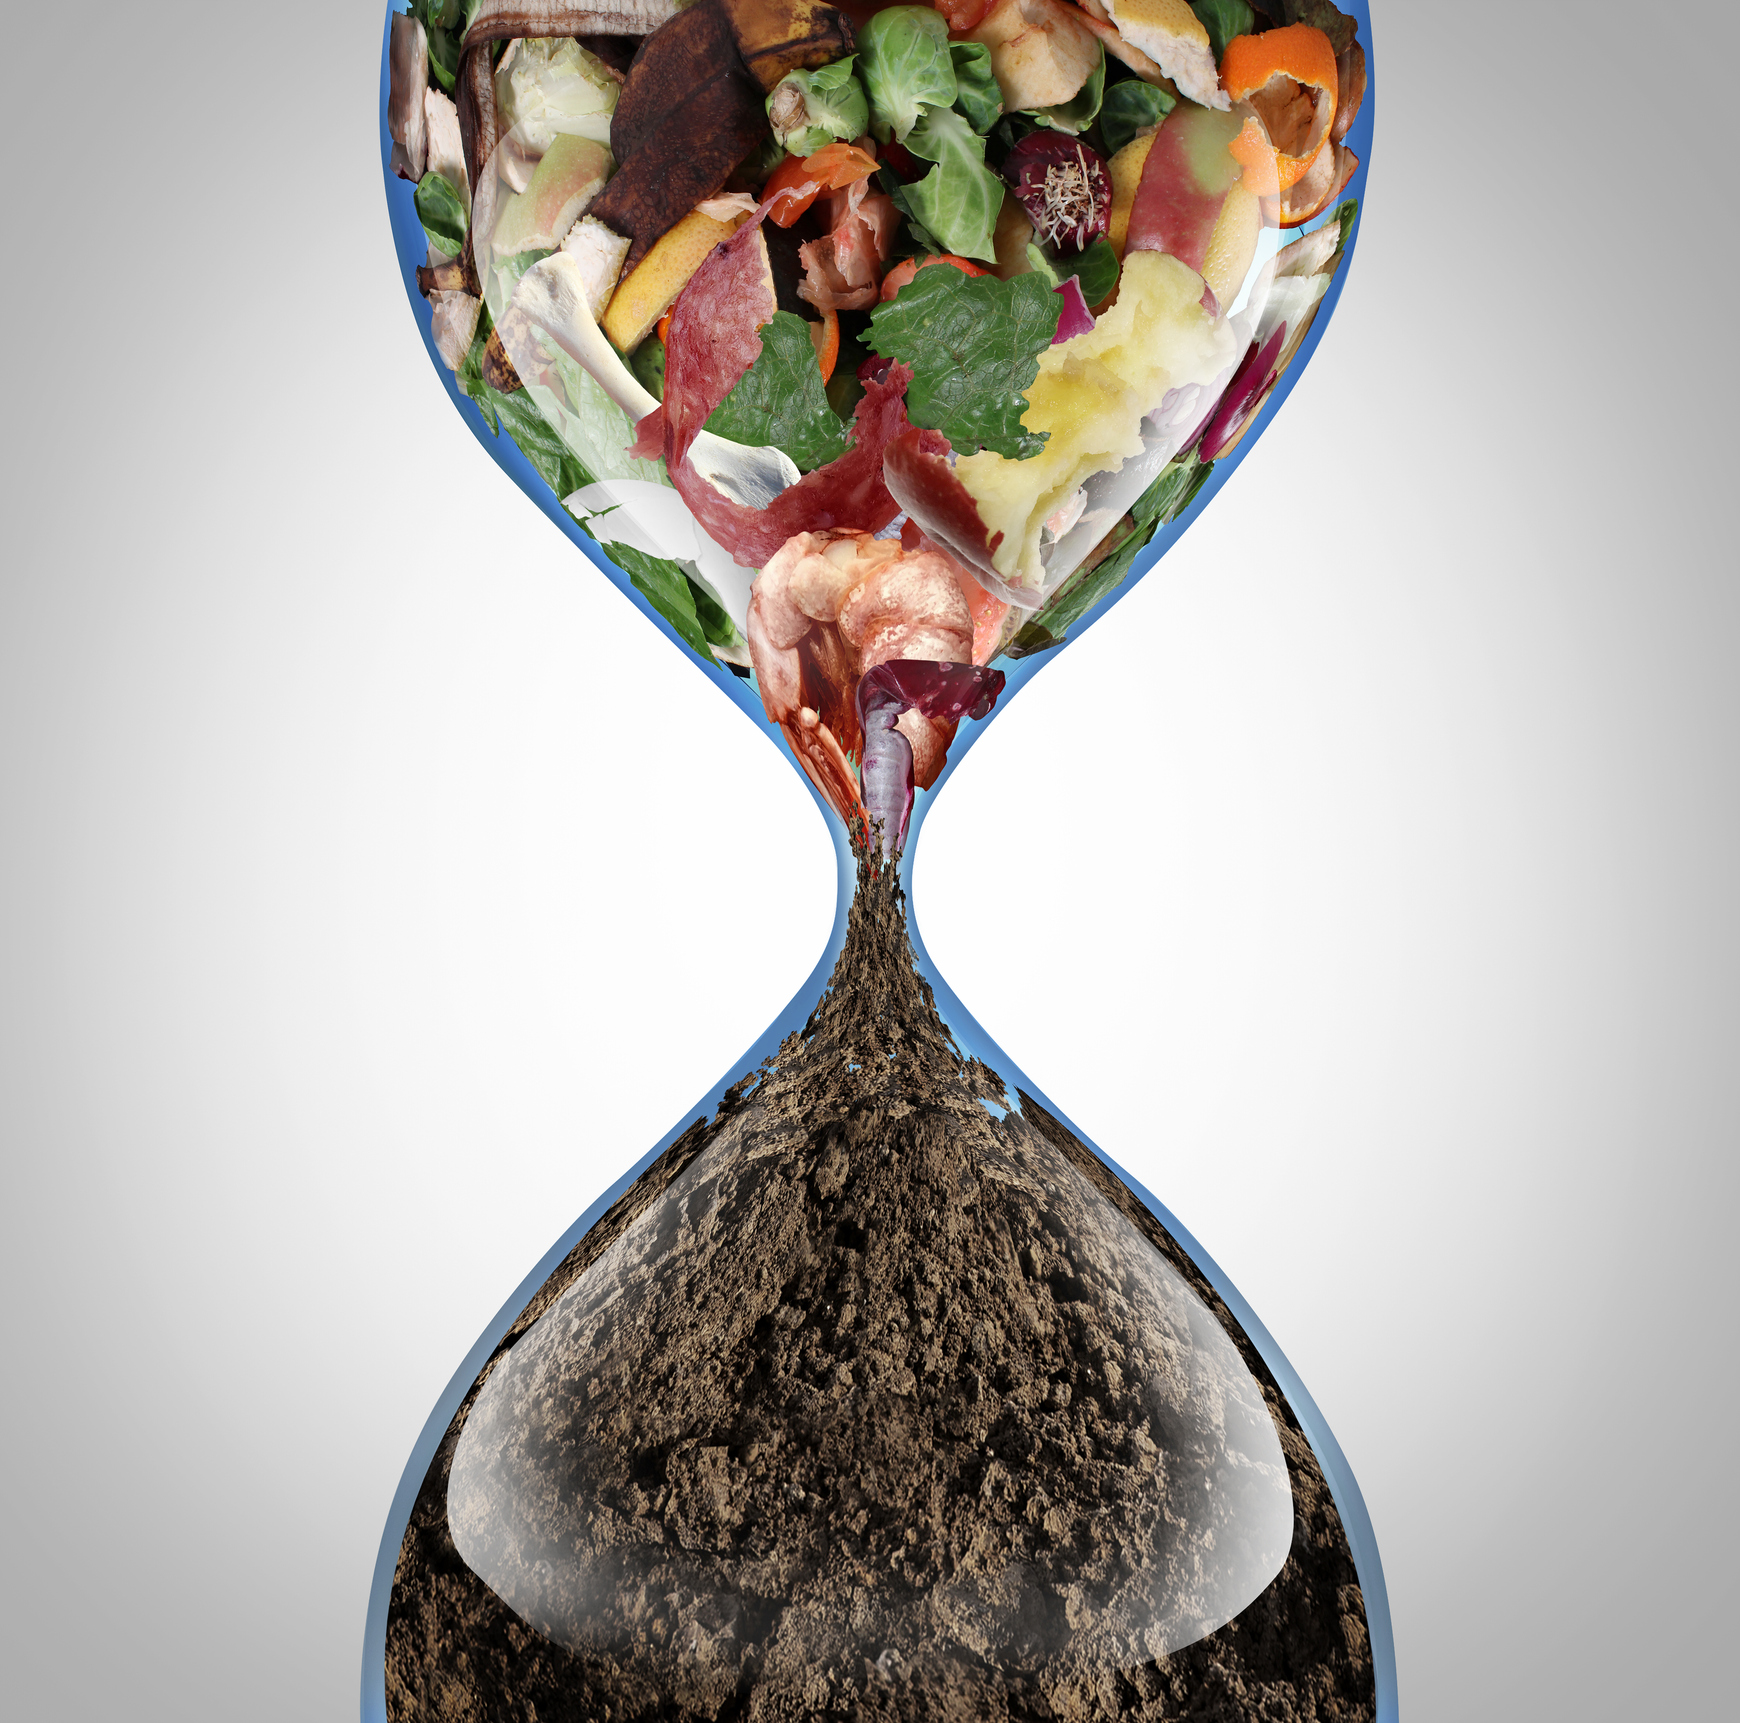 Composting recycling process as kitchen table scraps are transformed into organic soil in an hourglass with 3D illustration elements.